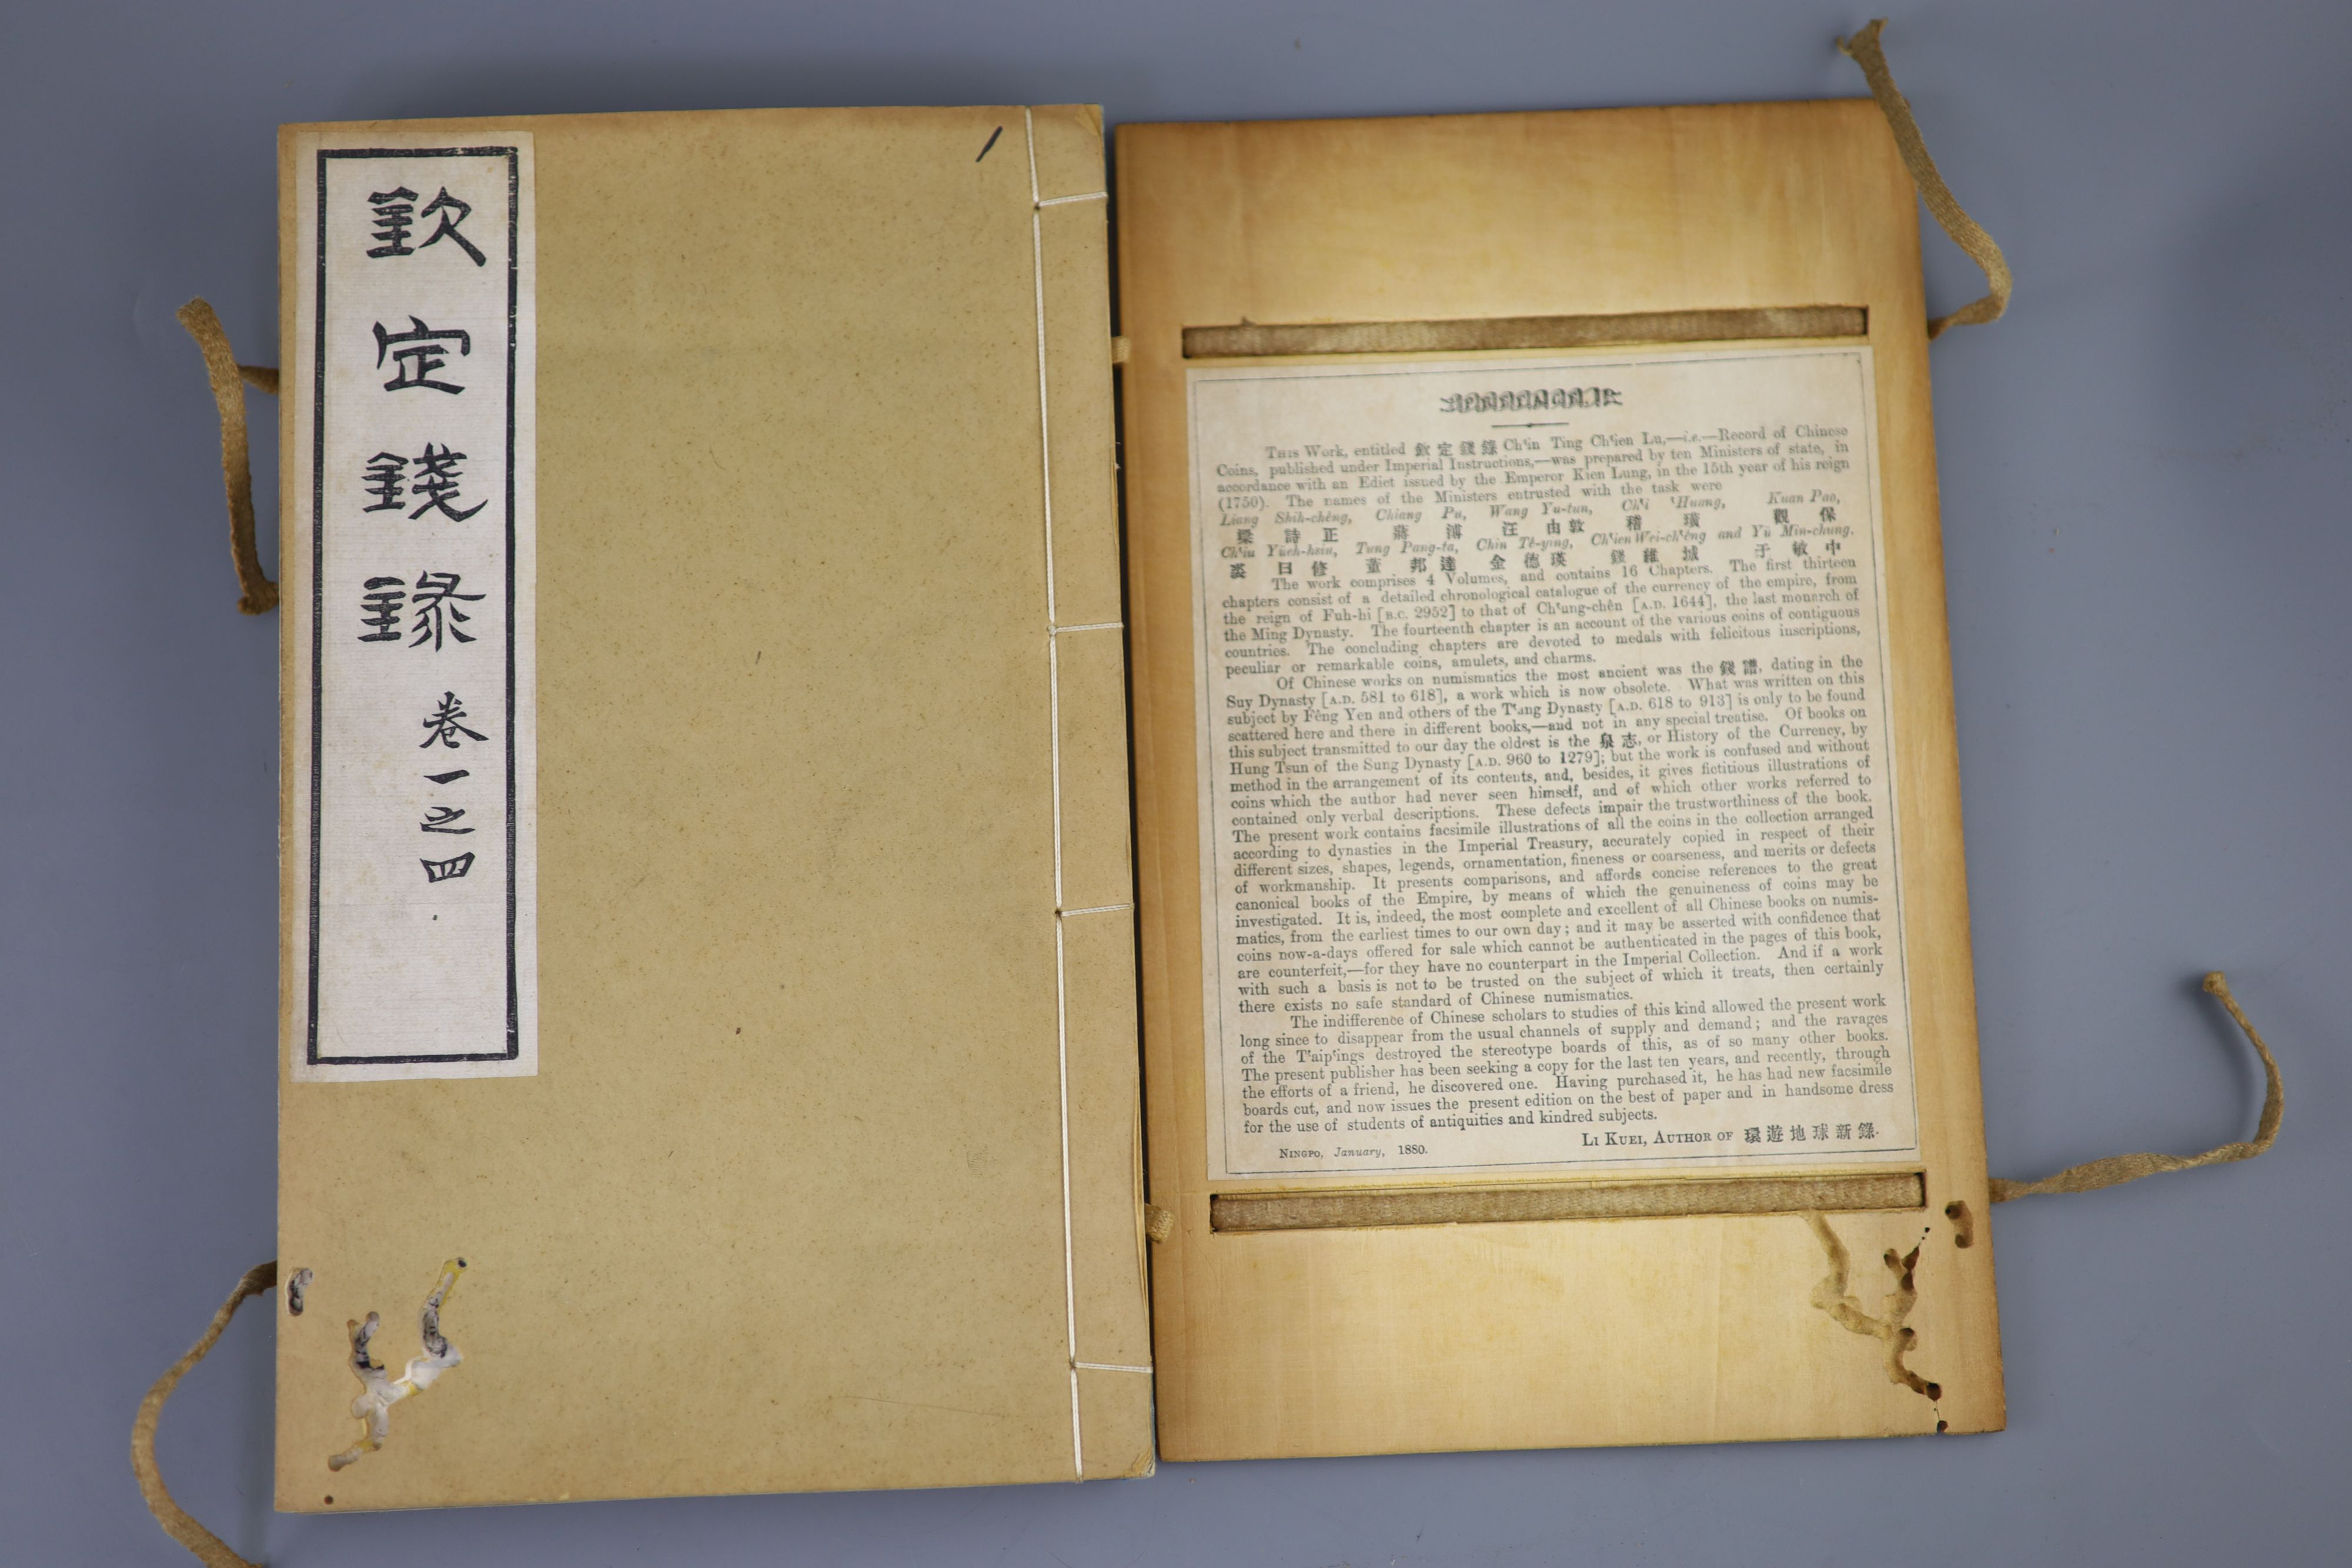 Liang Shizheng, Qin ding qian lu, Record of Chinese Coins published under Imperial Instructions, Provenance - A. T. Arber-Cooke